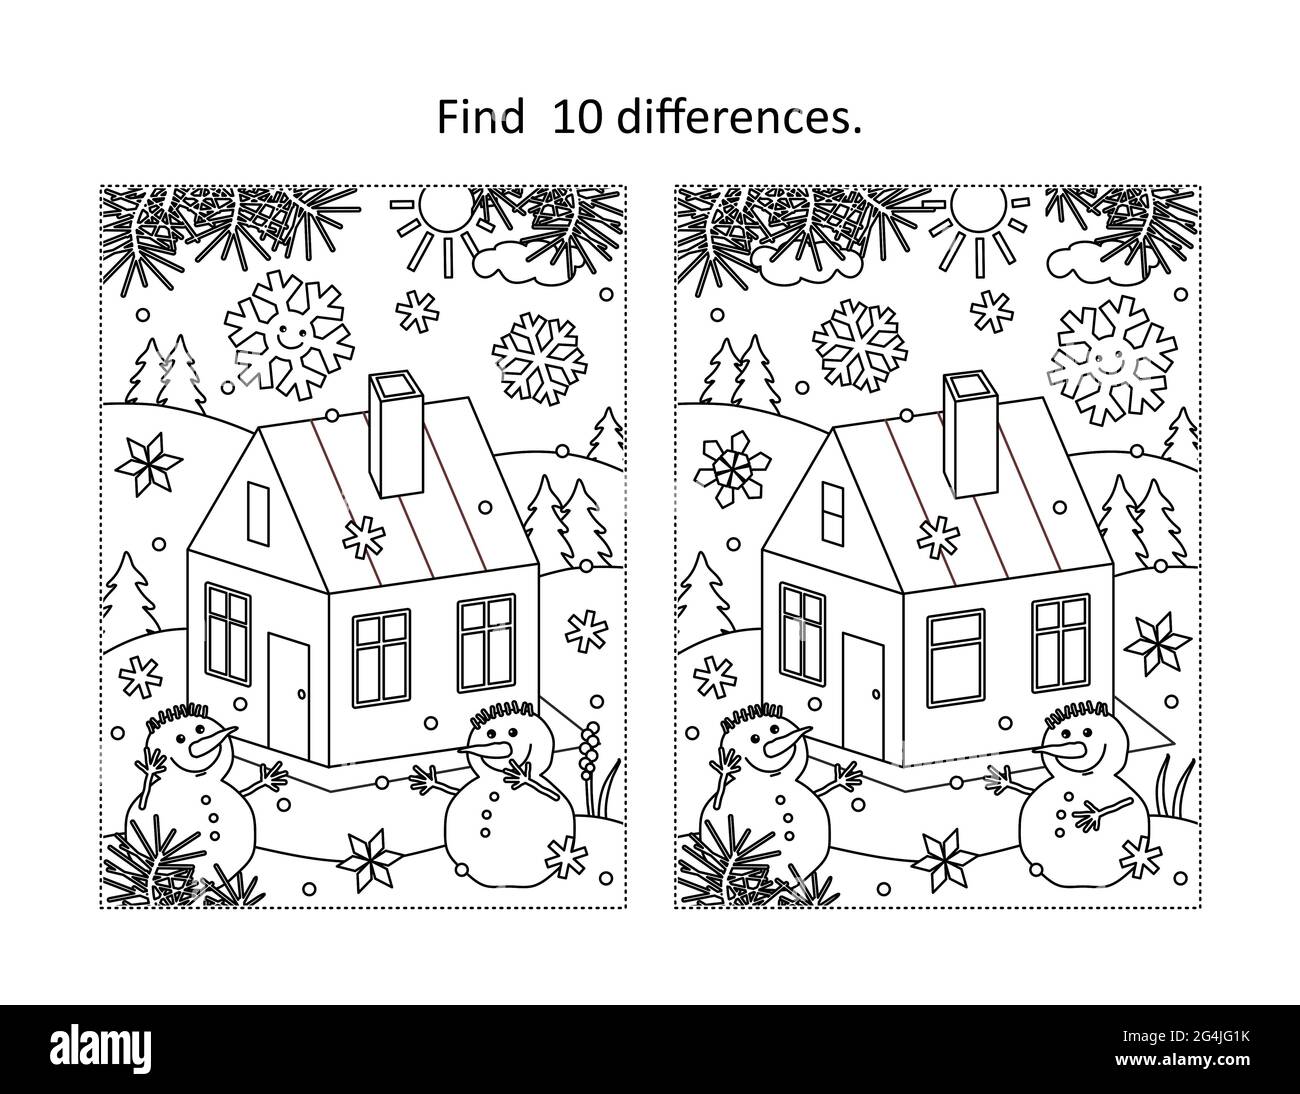 Find 20 differences visual puzzle and coloring page with cabin in ...